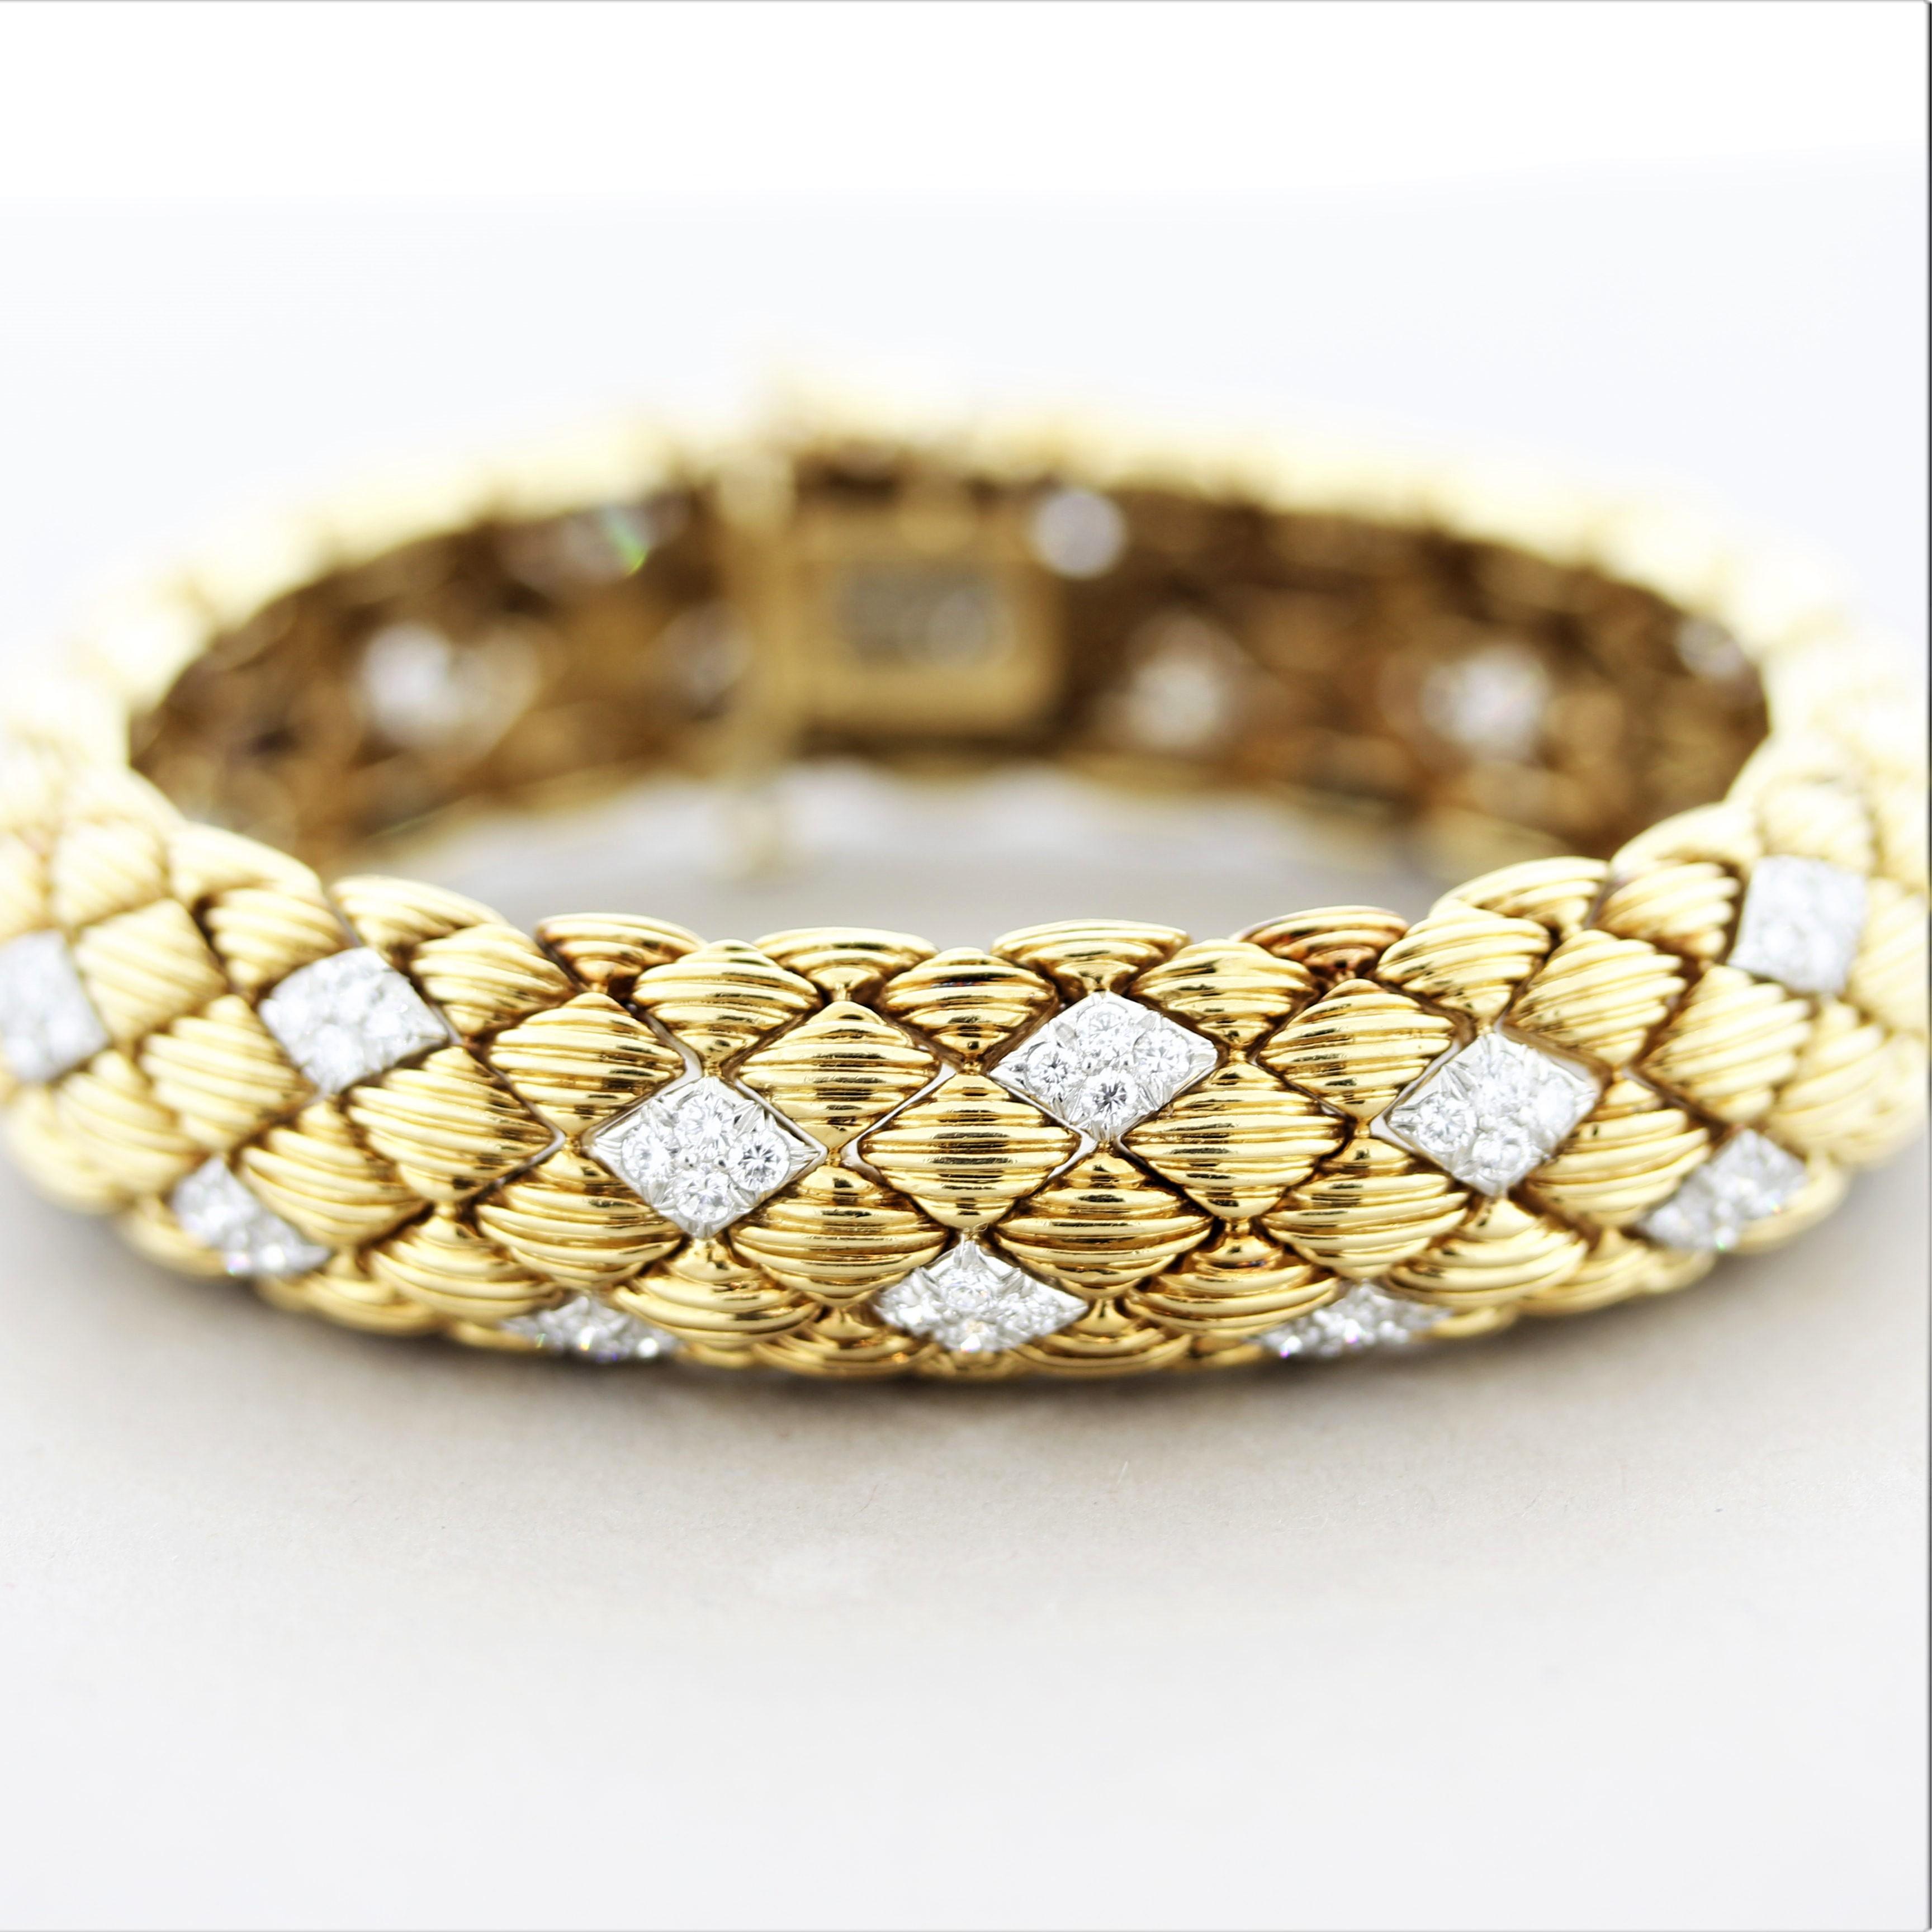 A sleek and stylish bracelet from famed American jeweler David Webb. The bracelet features 5 carats of round brilliant-cut diamonds set in diamond shaped white gold scales. The rest of the bracelet is made in 18k yellow gold with hand-finished